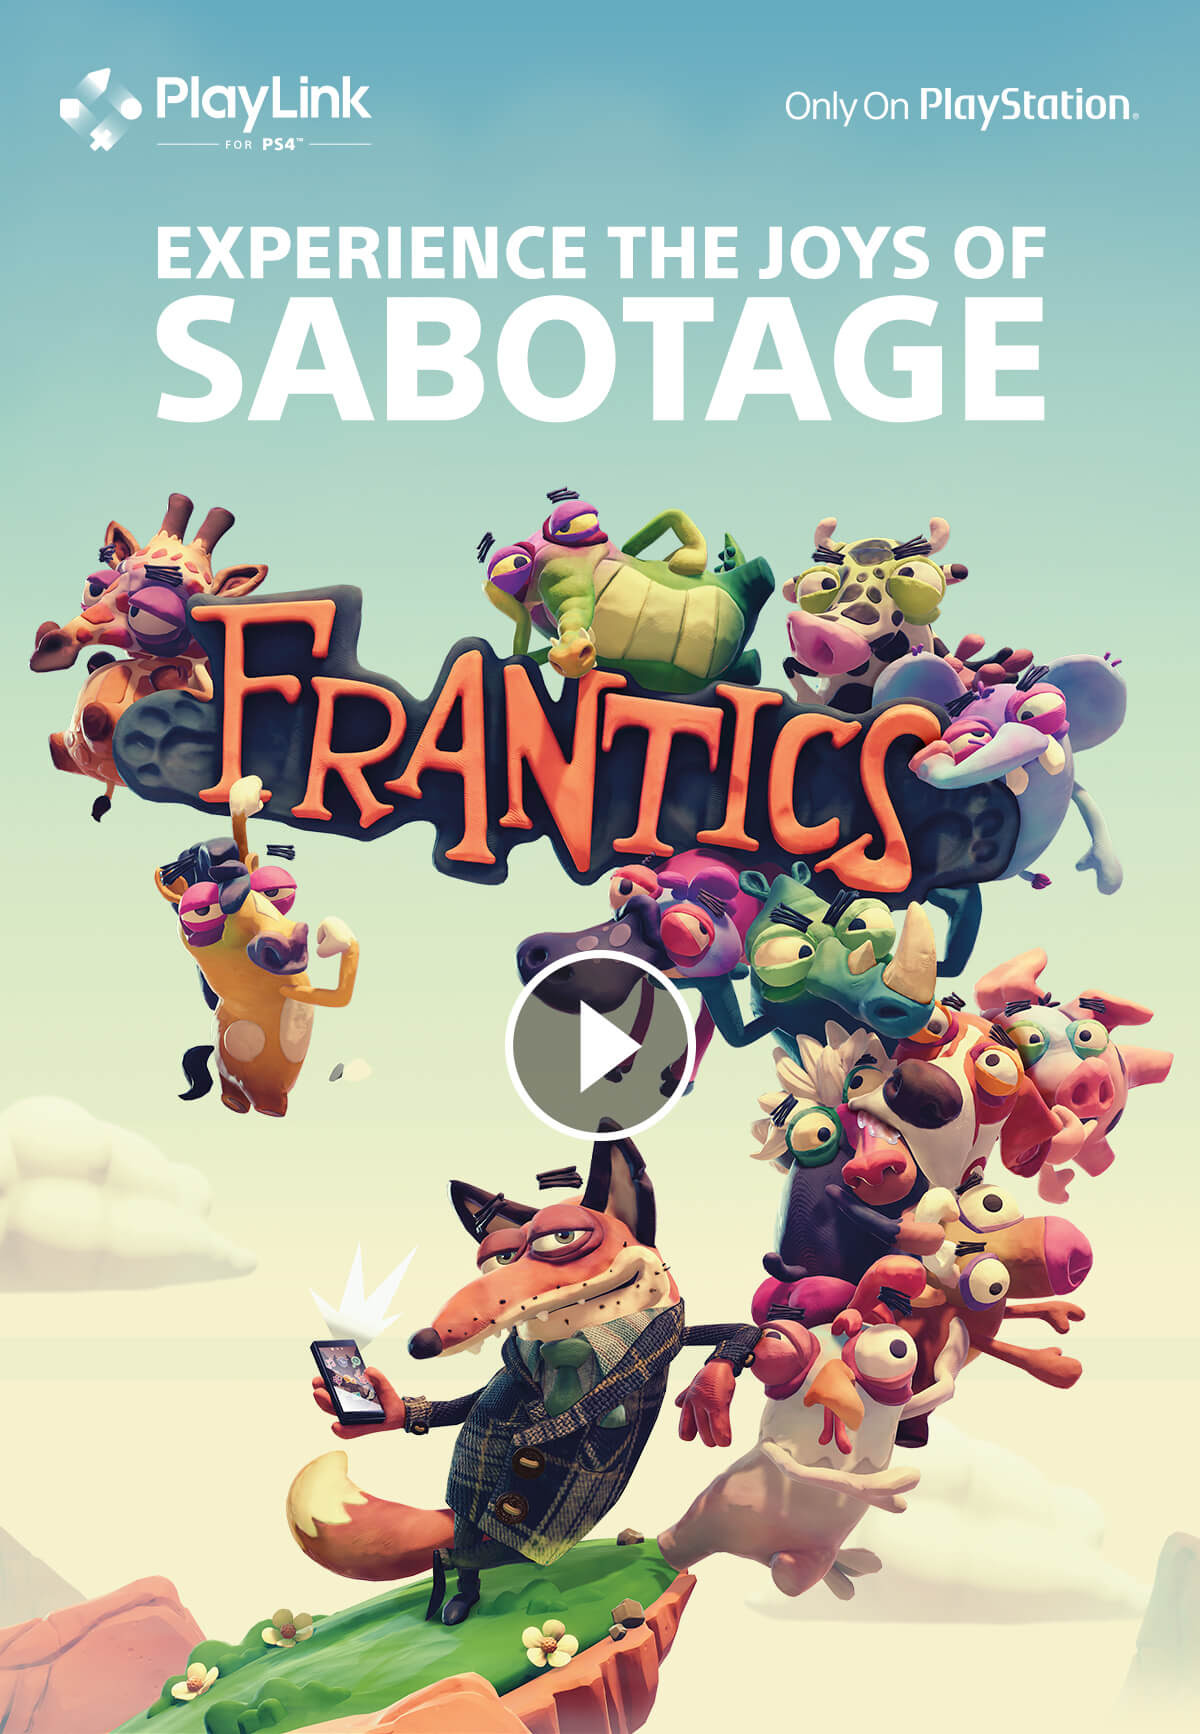 PlayLink FOR PS4 | Only on Playstation(R) EXPERIENCE THE JOYS OF SABOTAGE FRANTICS